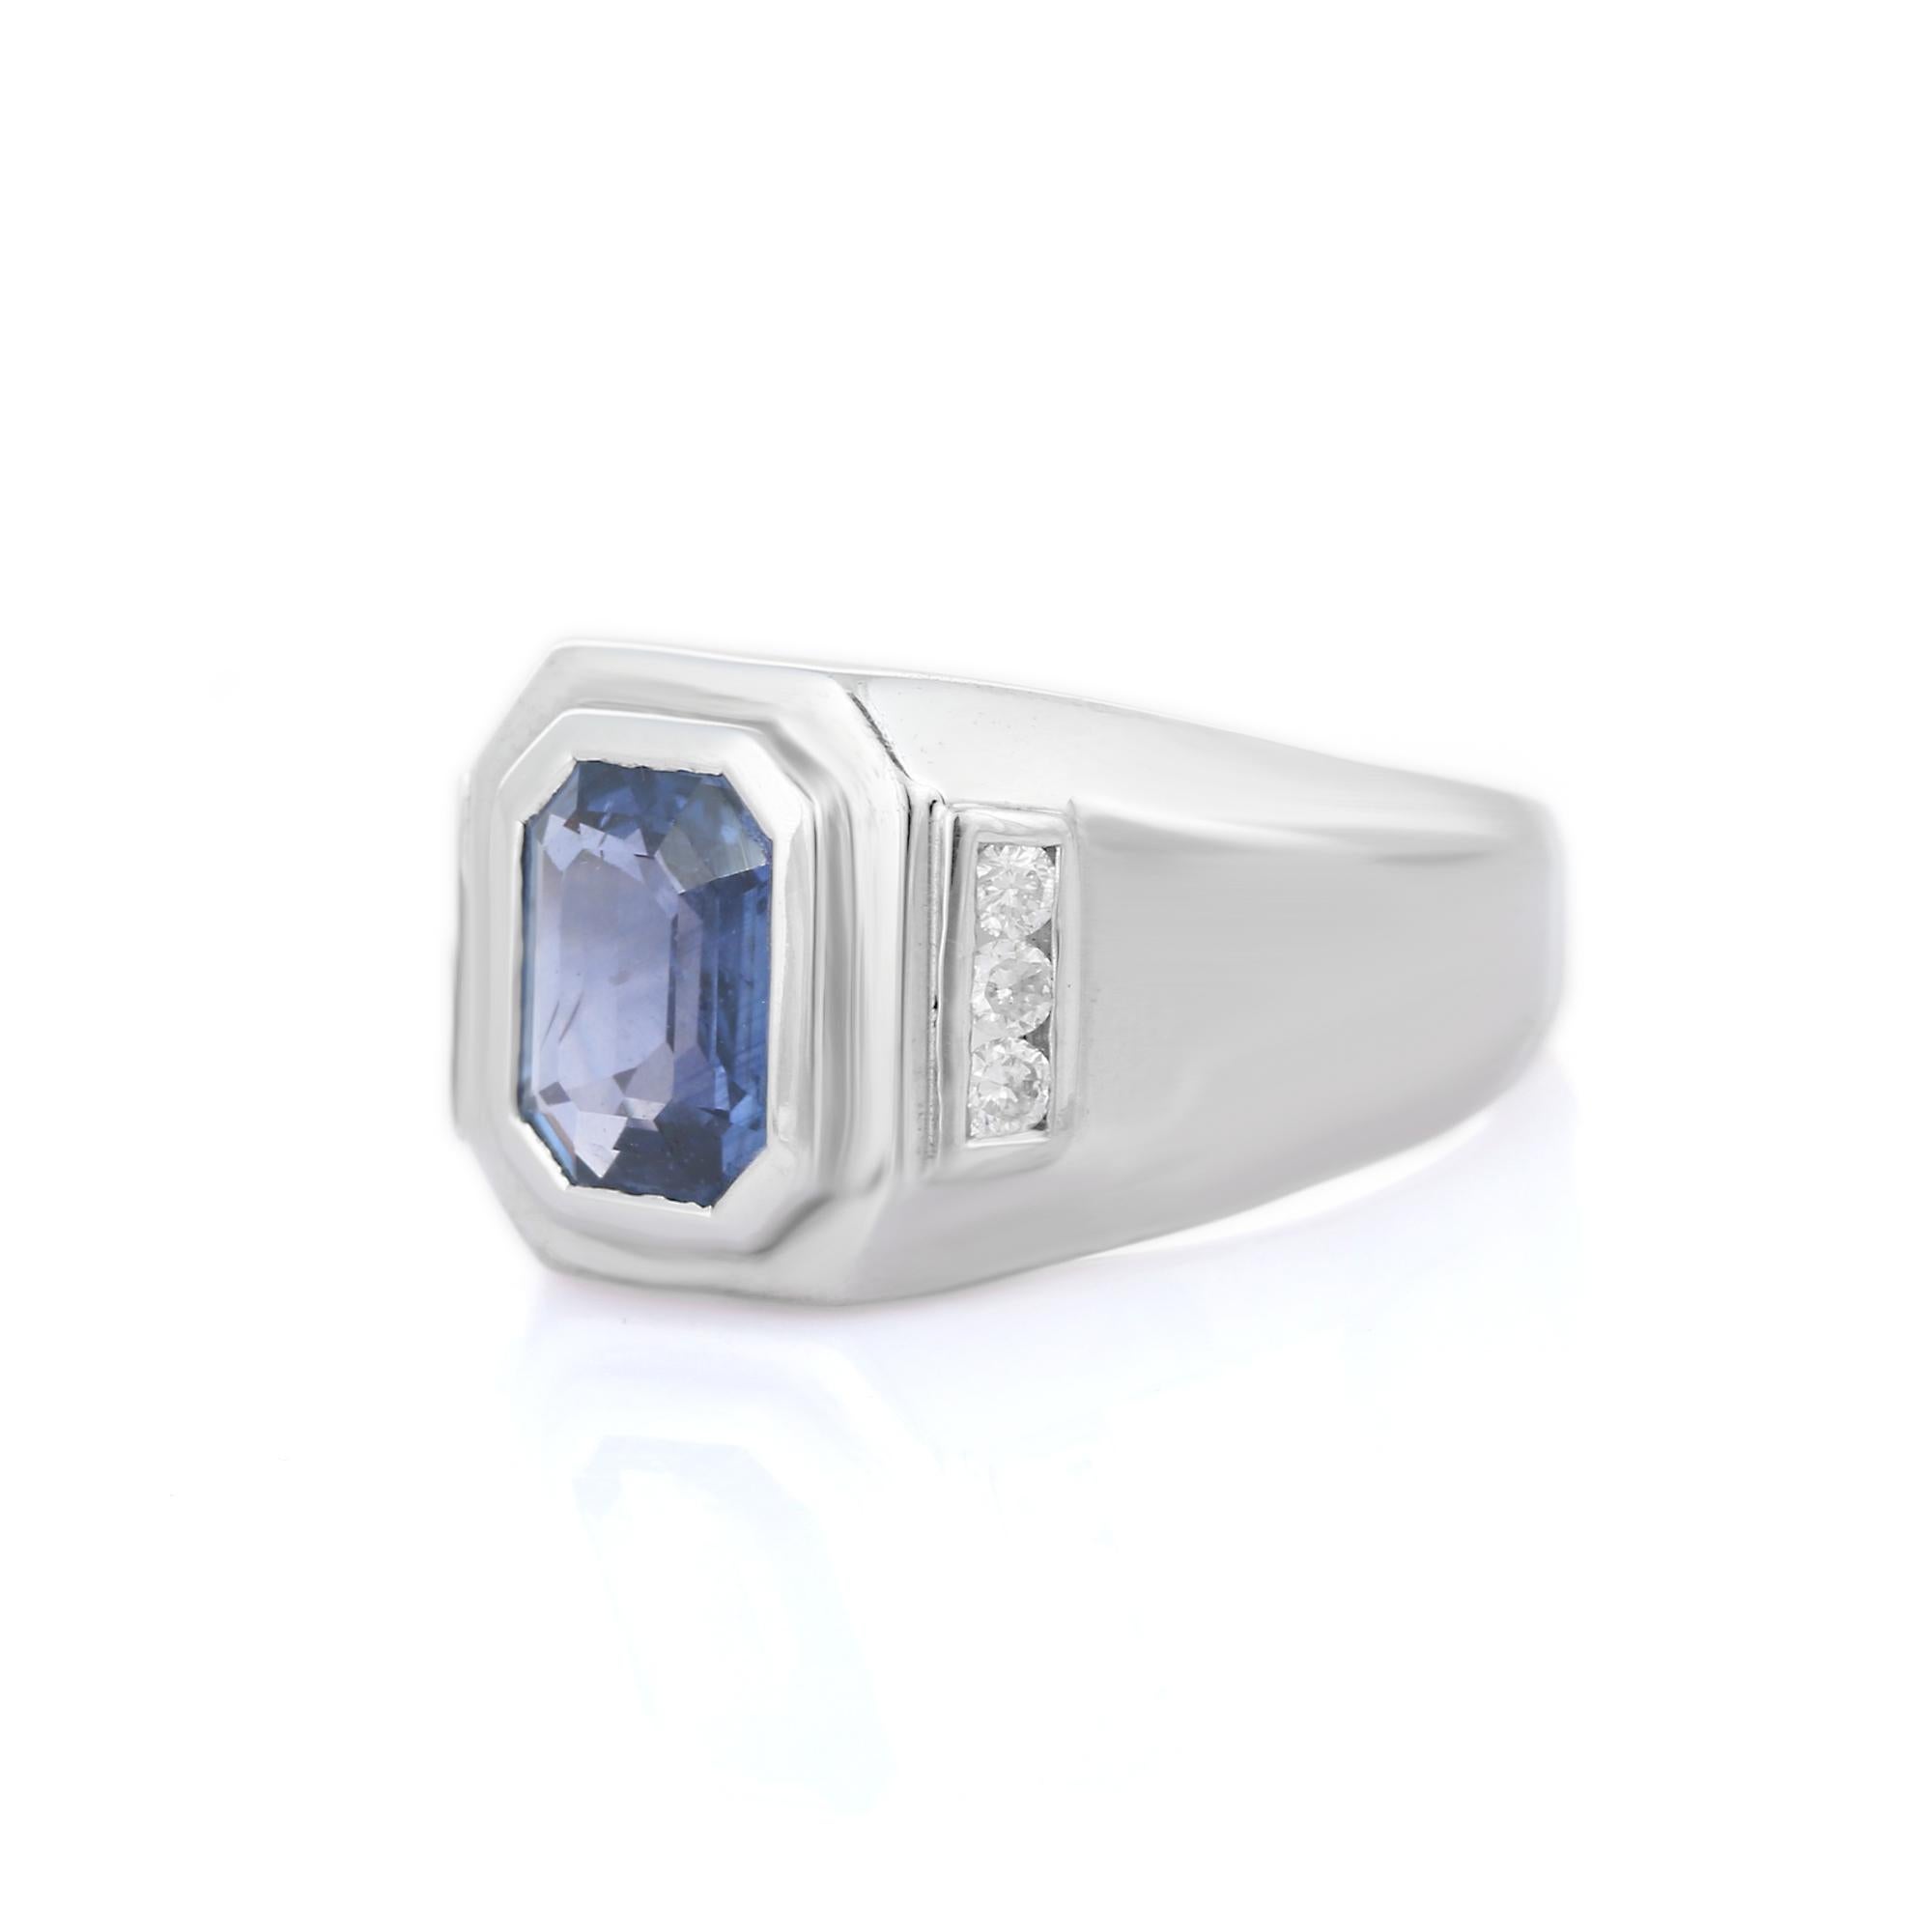 For Sale:  Statement Blue Sapphire and Diamond Men's Wedding Ring 18k White Gold 4